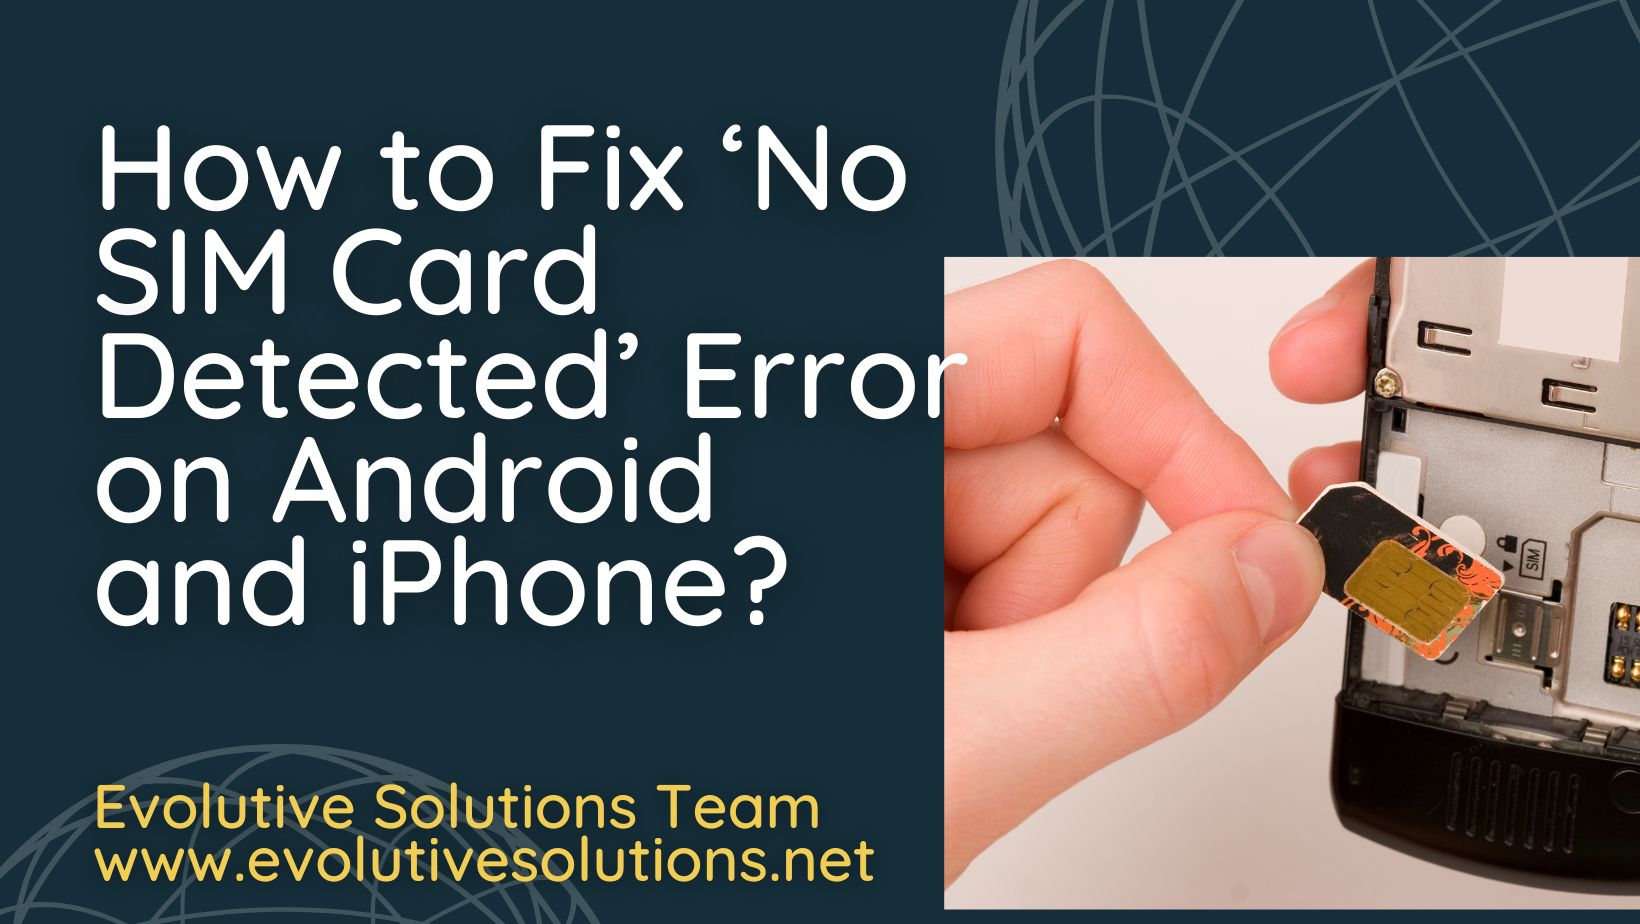 How to Fix ‘No SIM Card Detected’ Error on Android and iPhone?